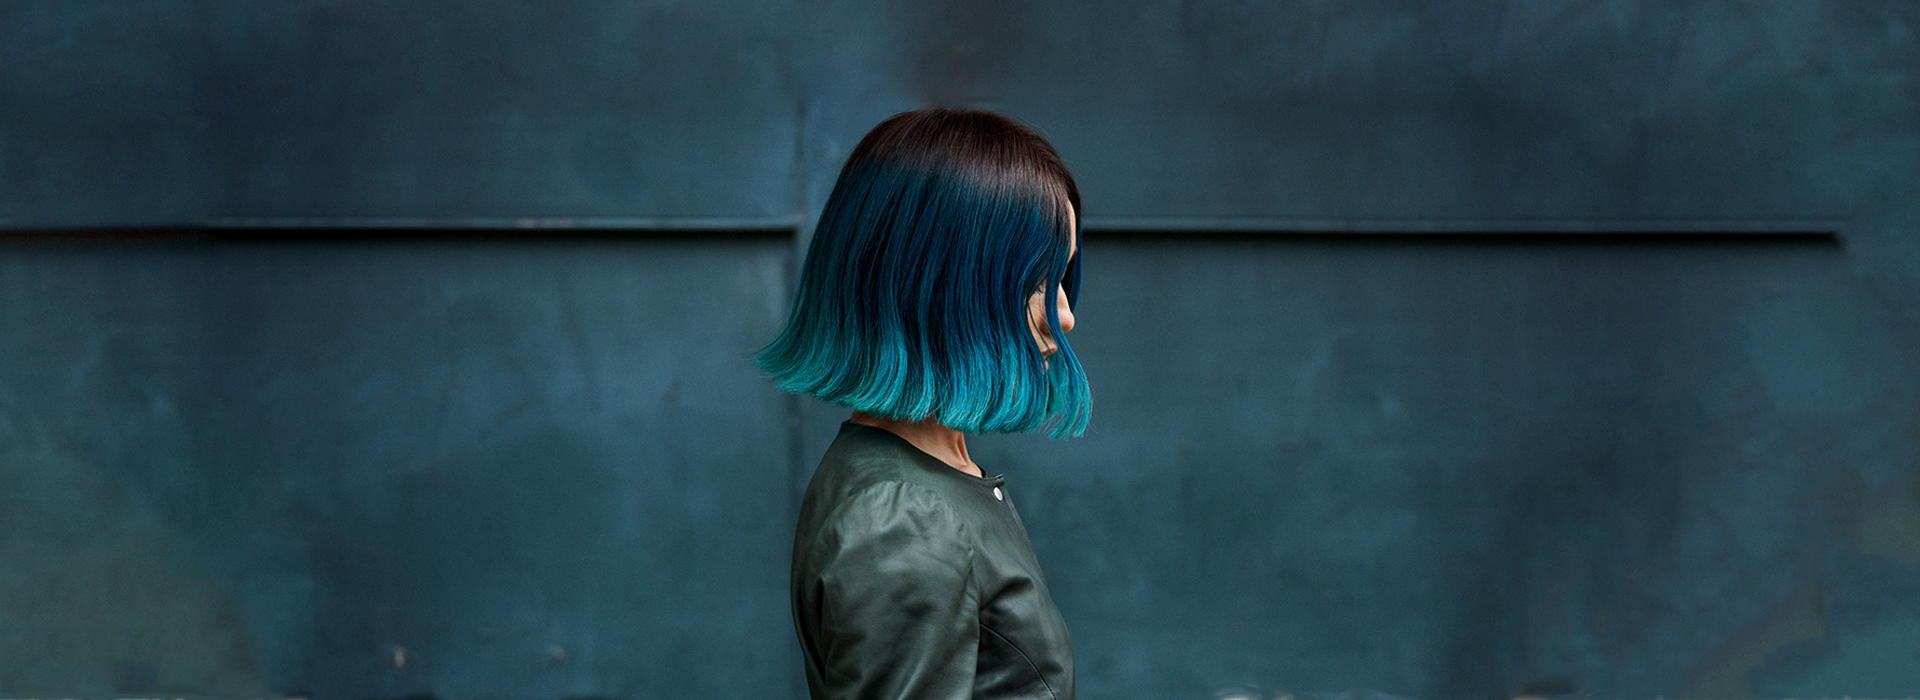 Woman with short hair. Hair color transitions from top to bottom as brown, blue and finally cyan